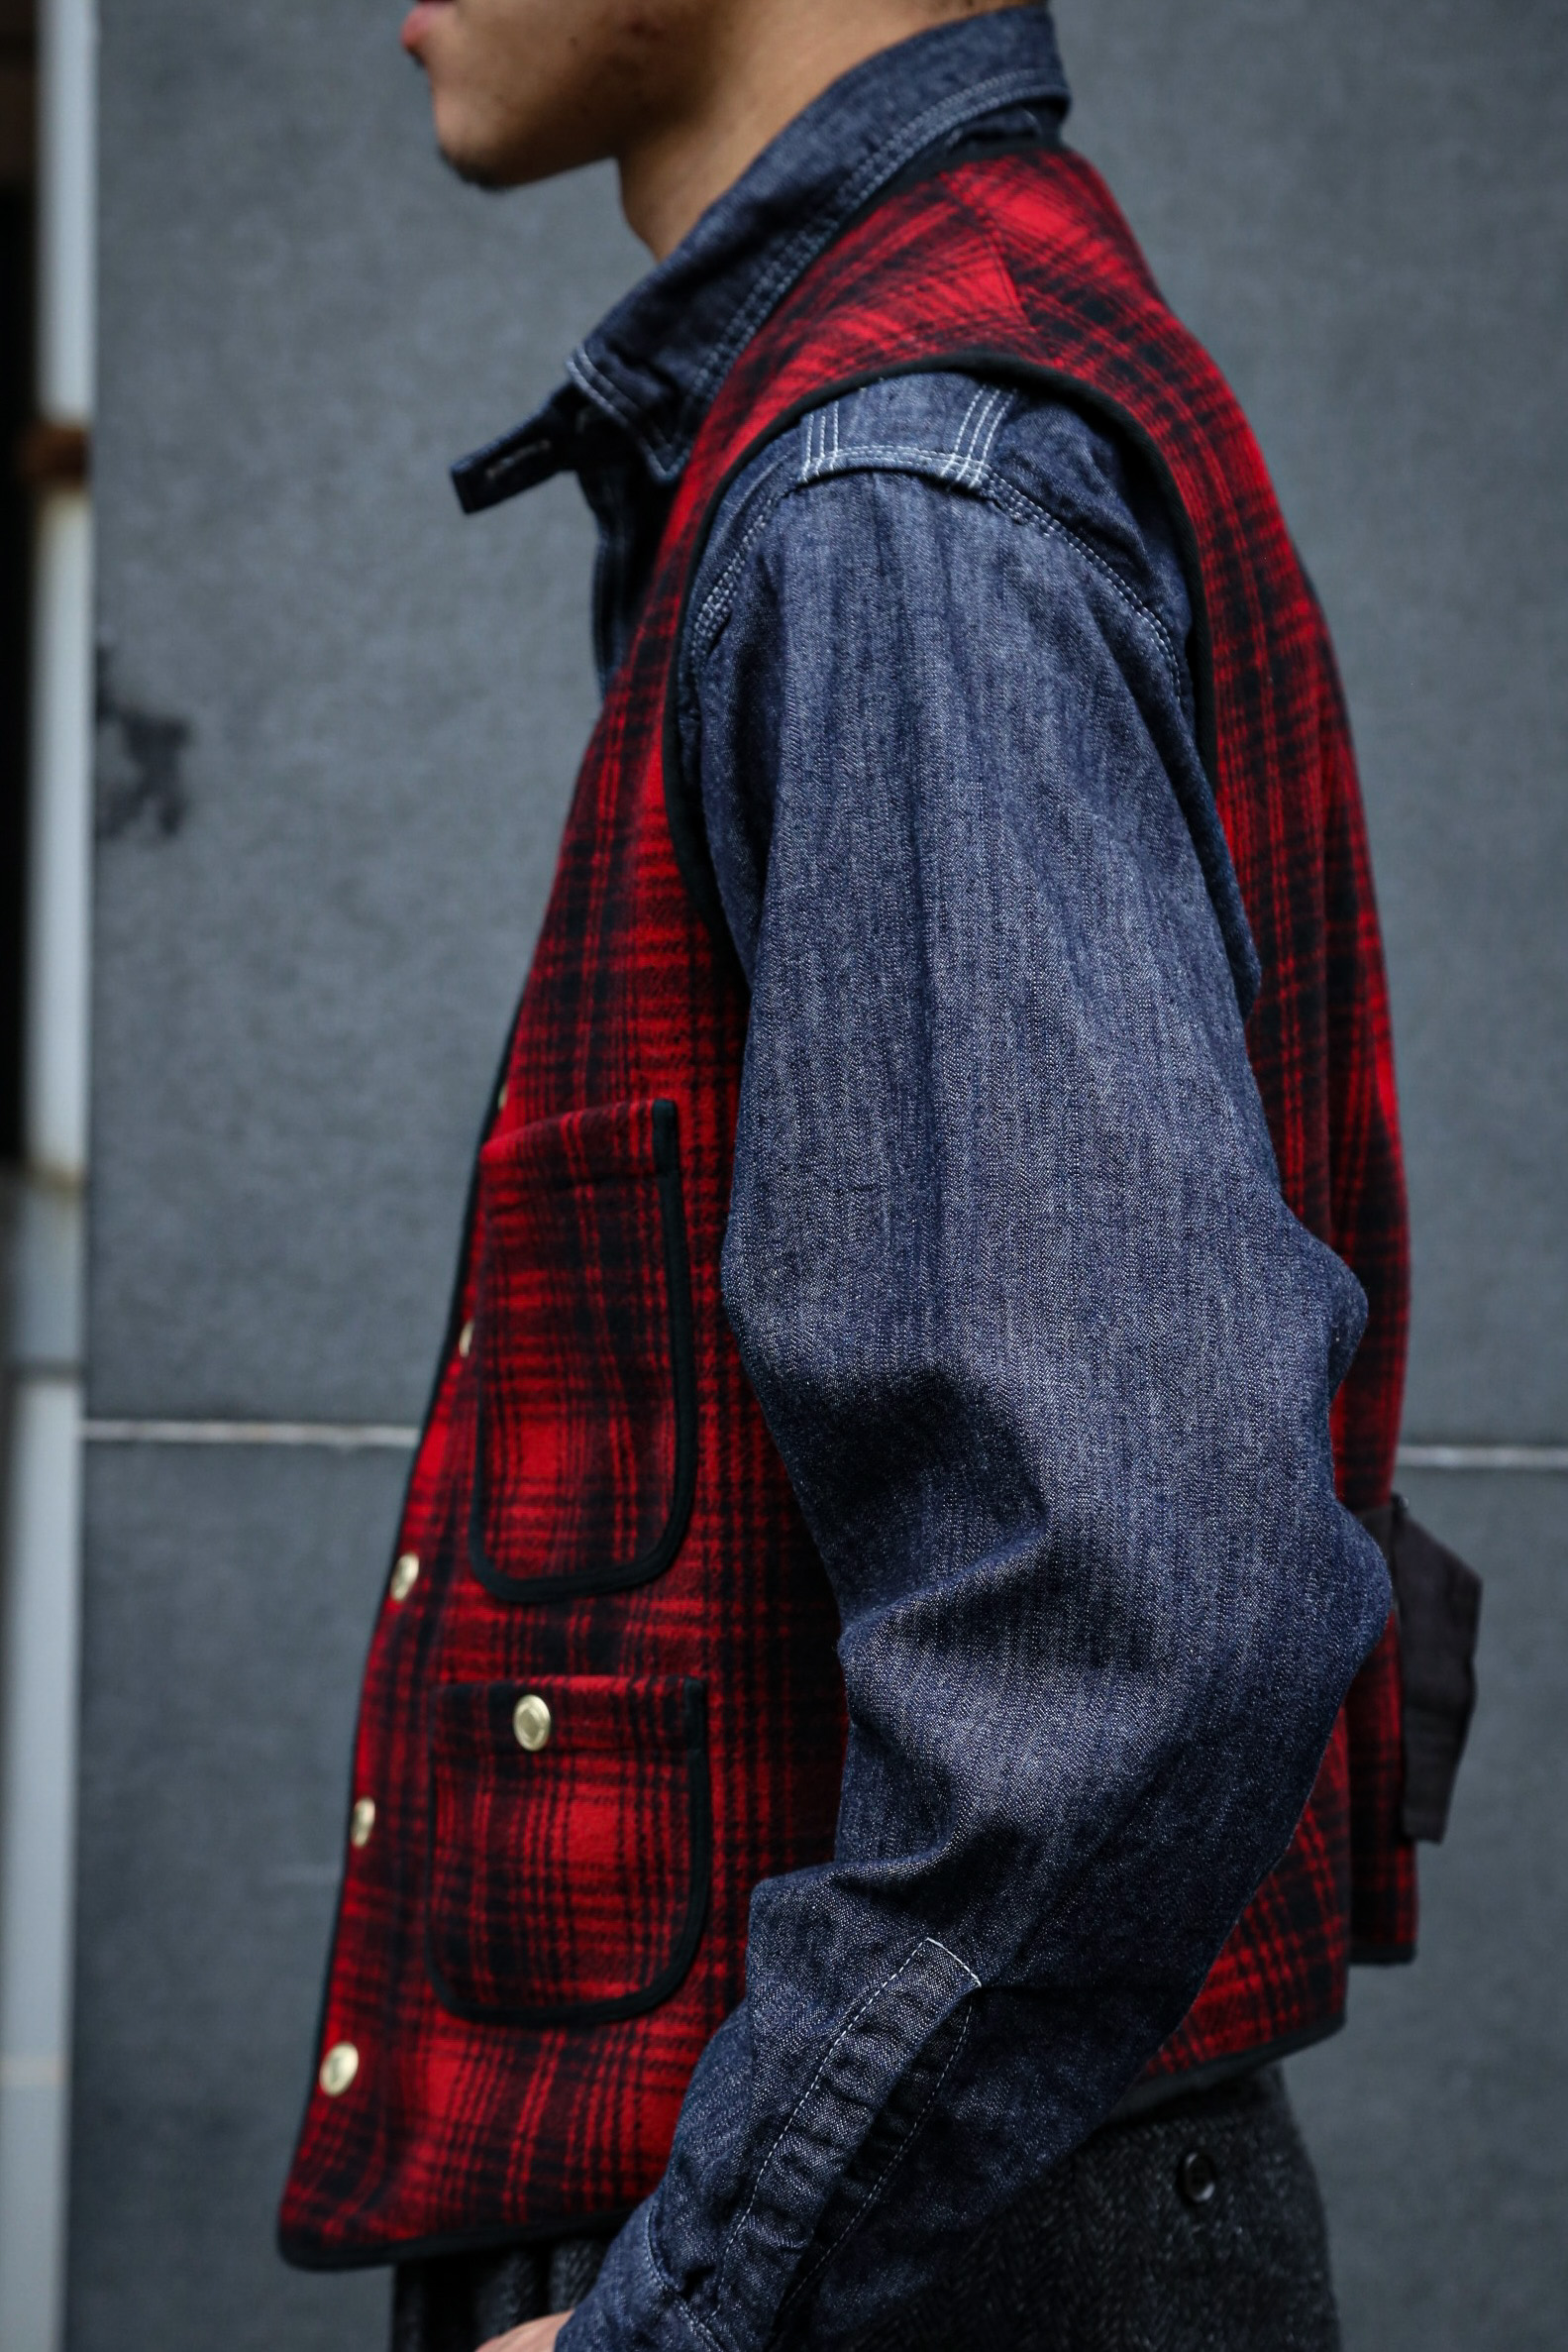 WOOLRICH AUTHENTIC COLLECTION” THE DAY BEFORE | ARCH TOKYO